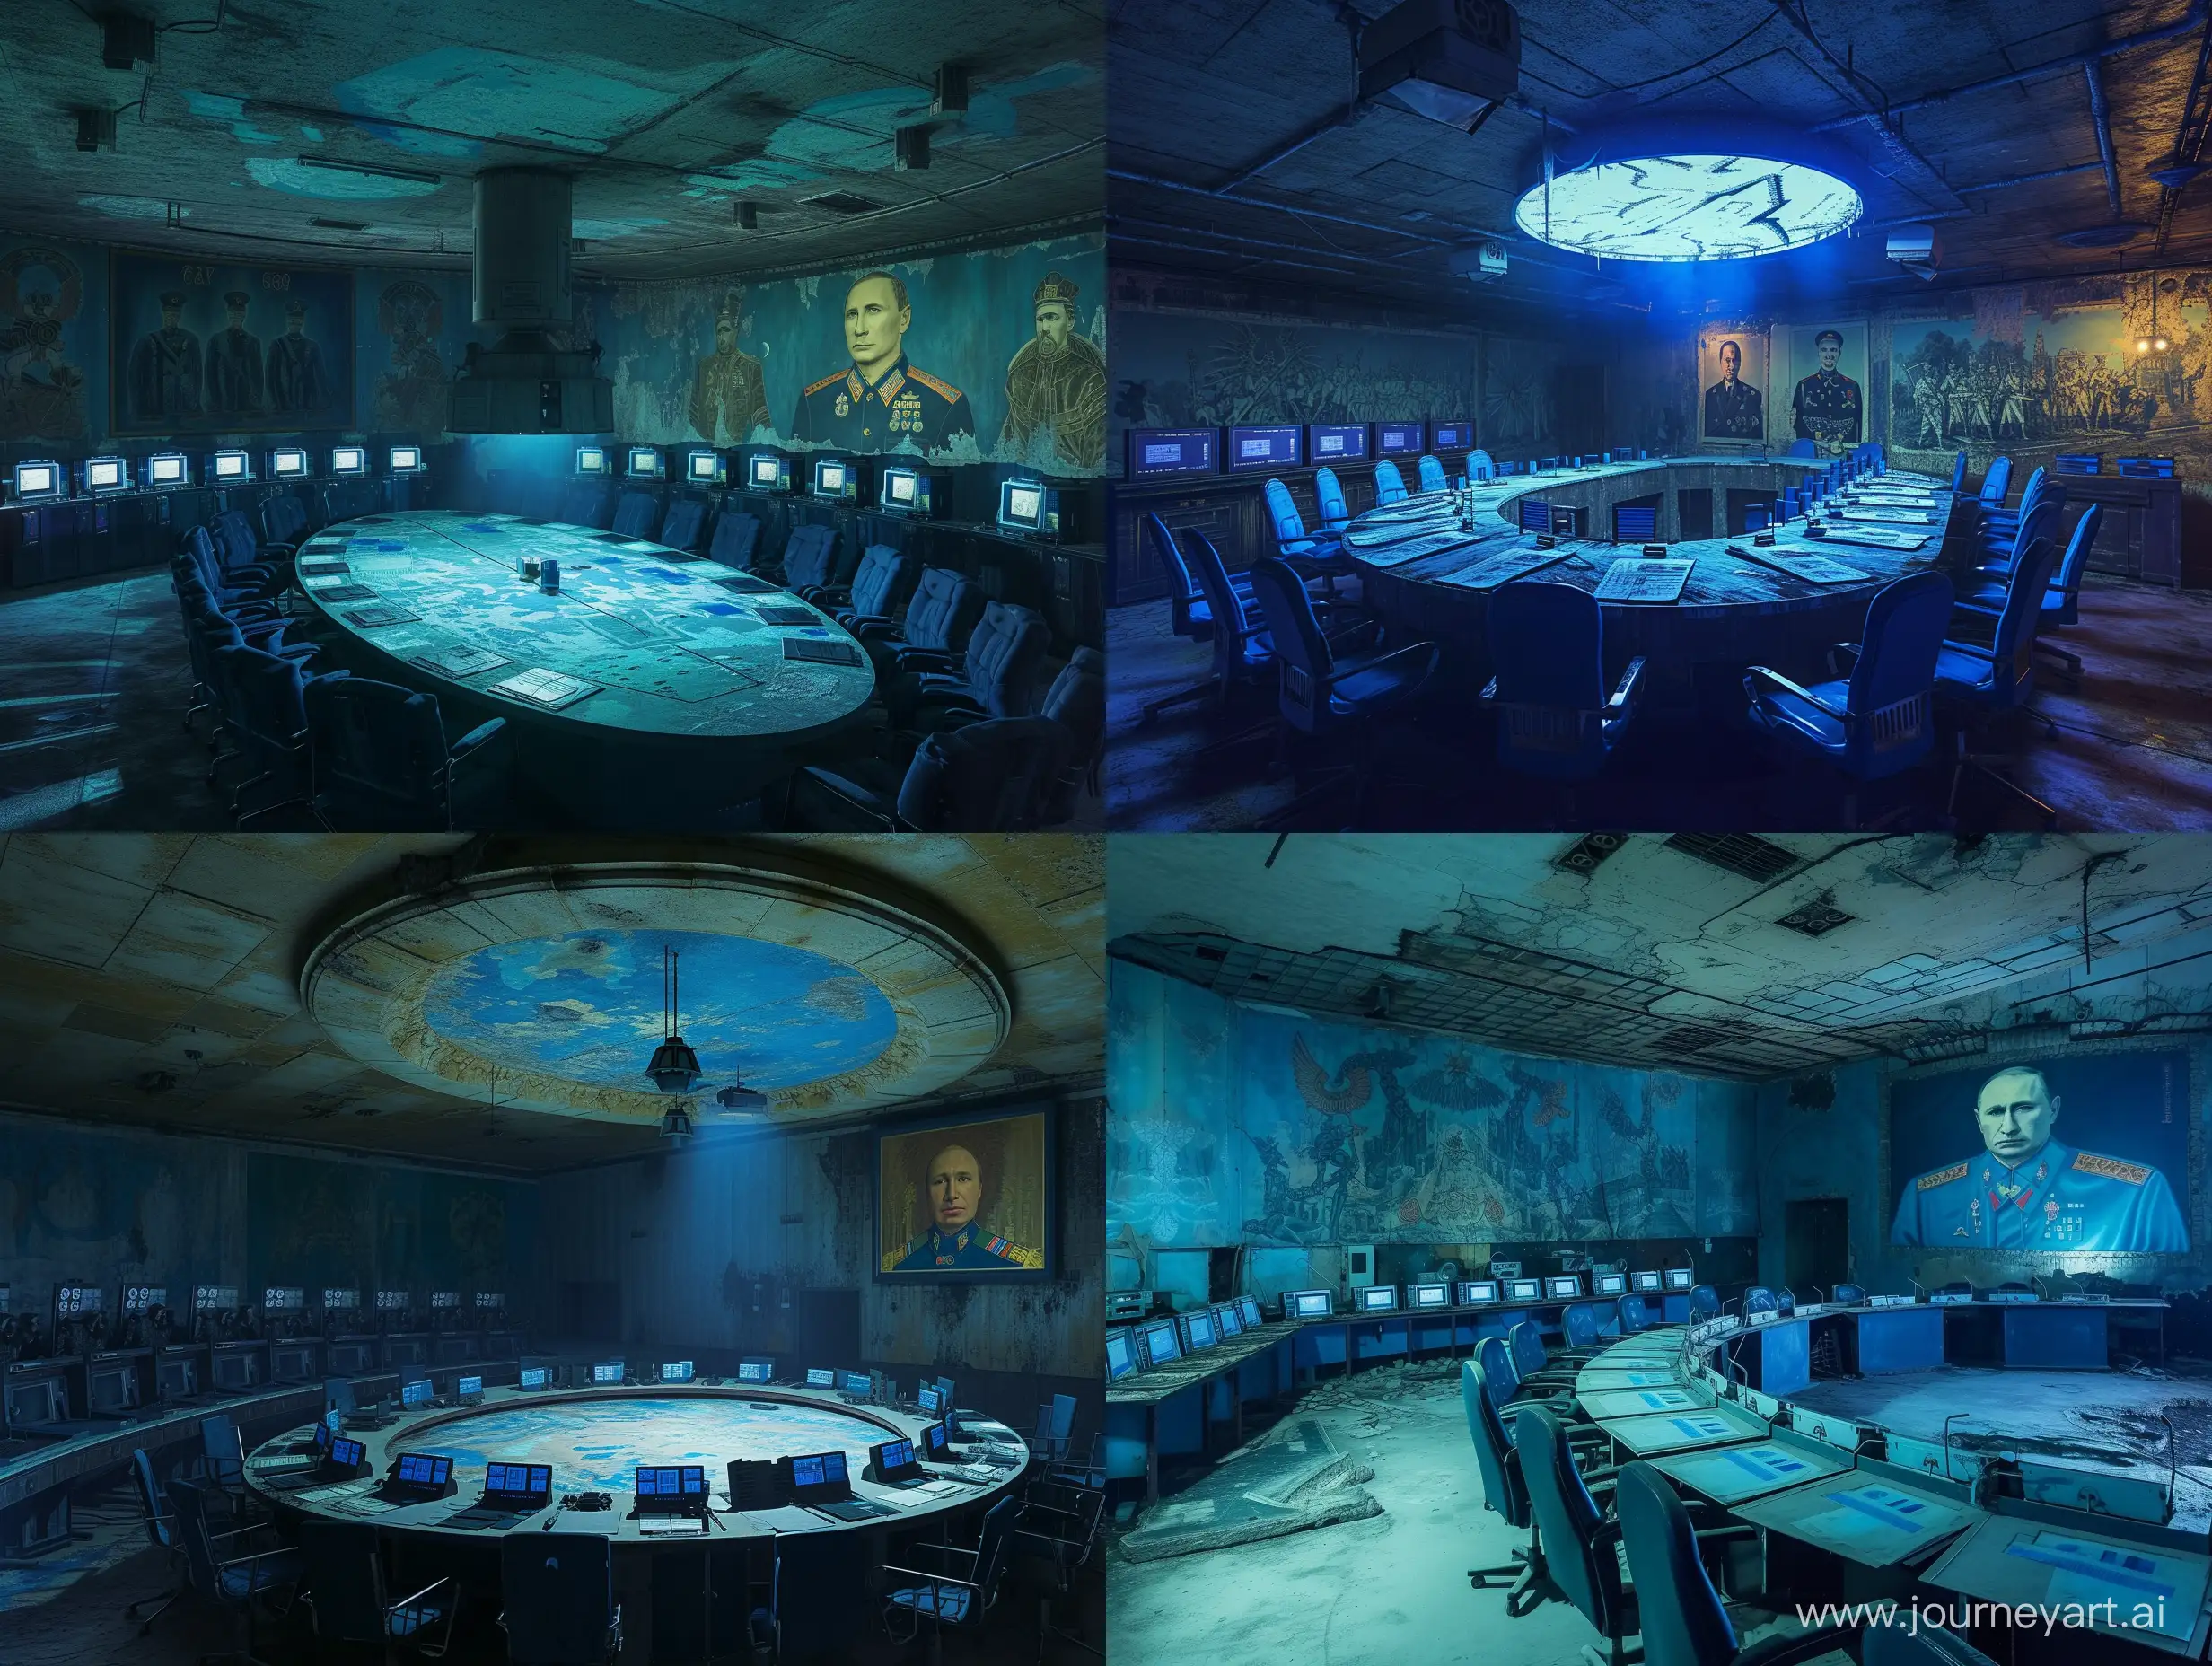 Russian-Military-Strategy-Meeting-in-Subterranean-Chamber